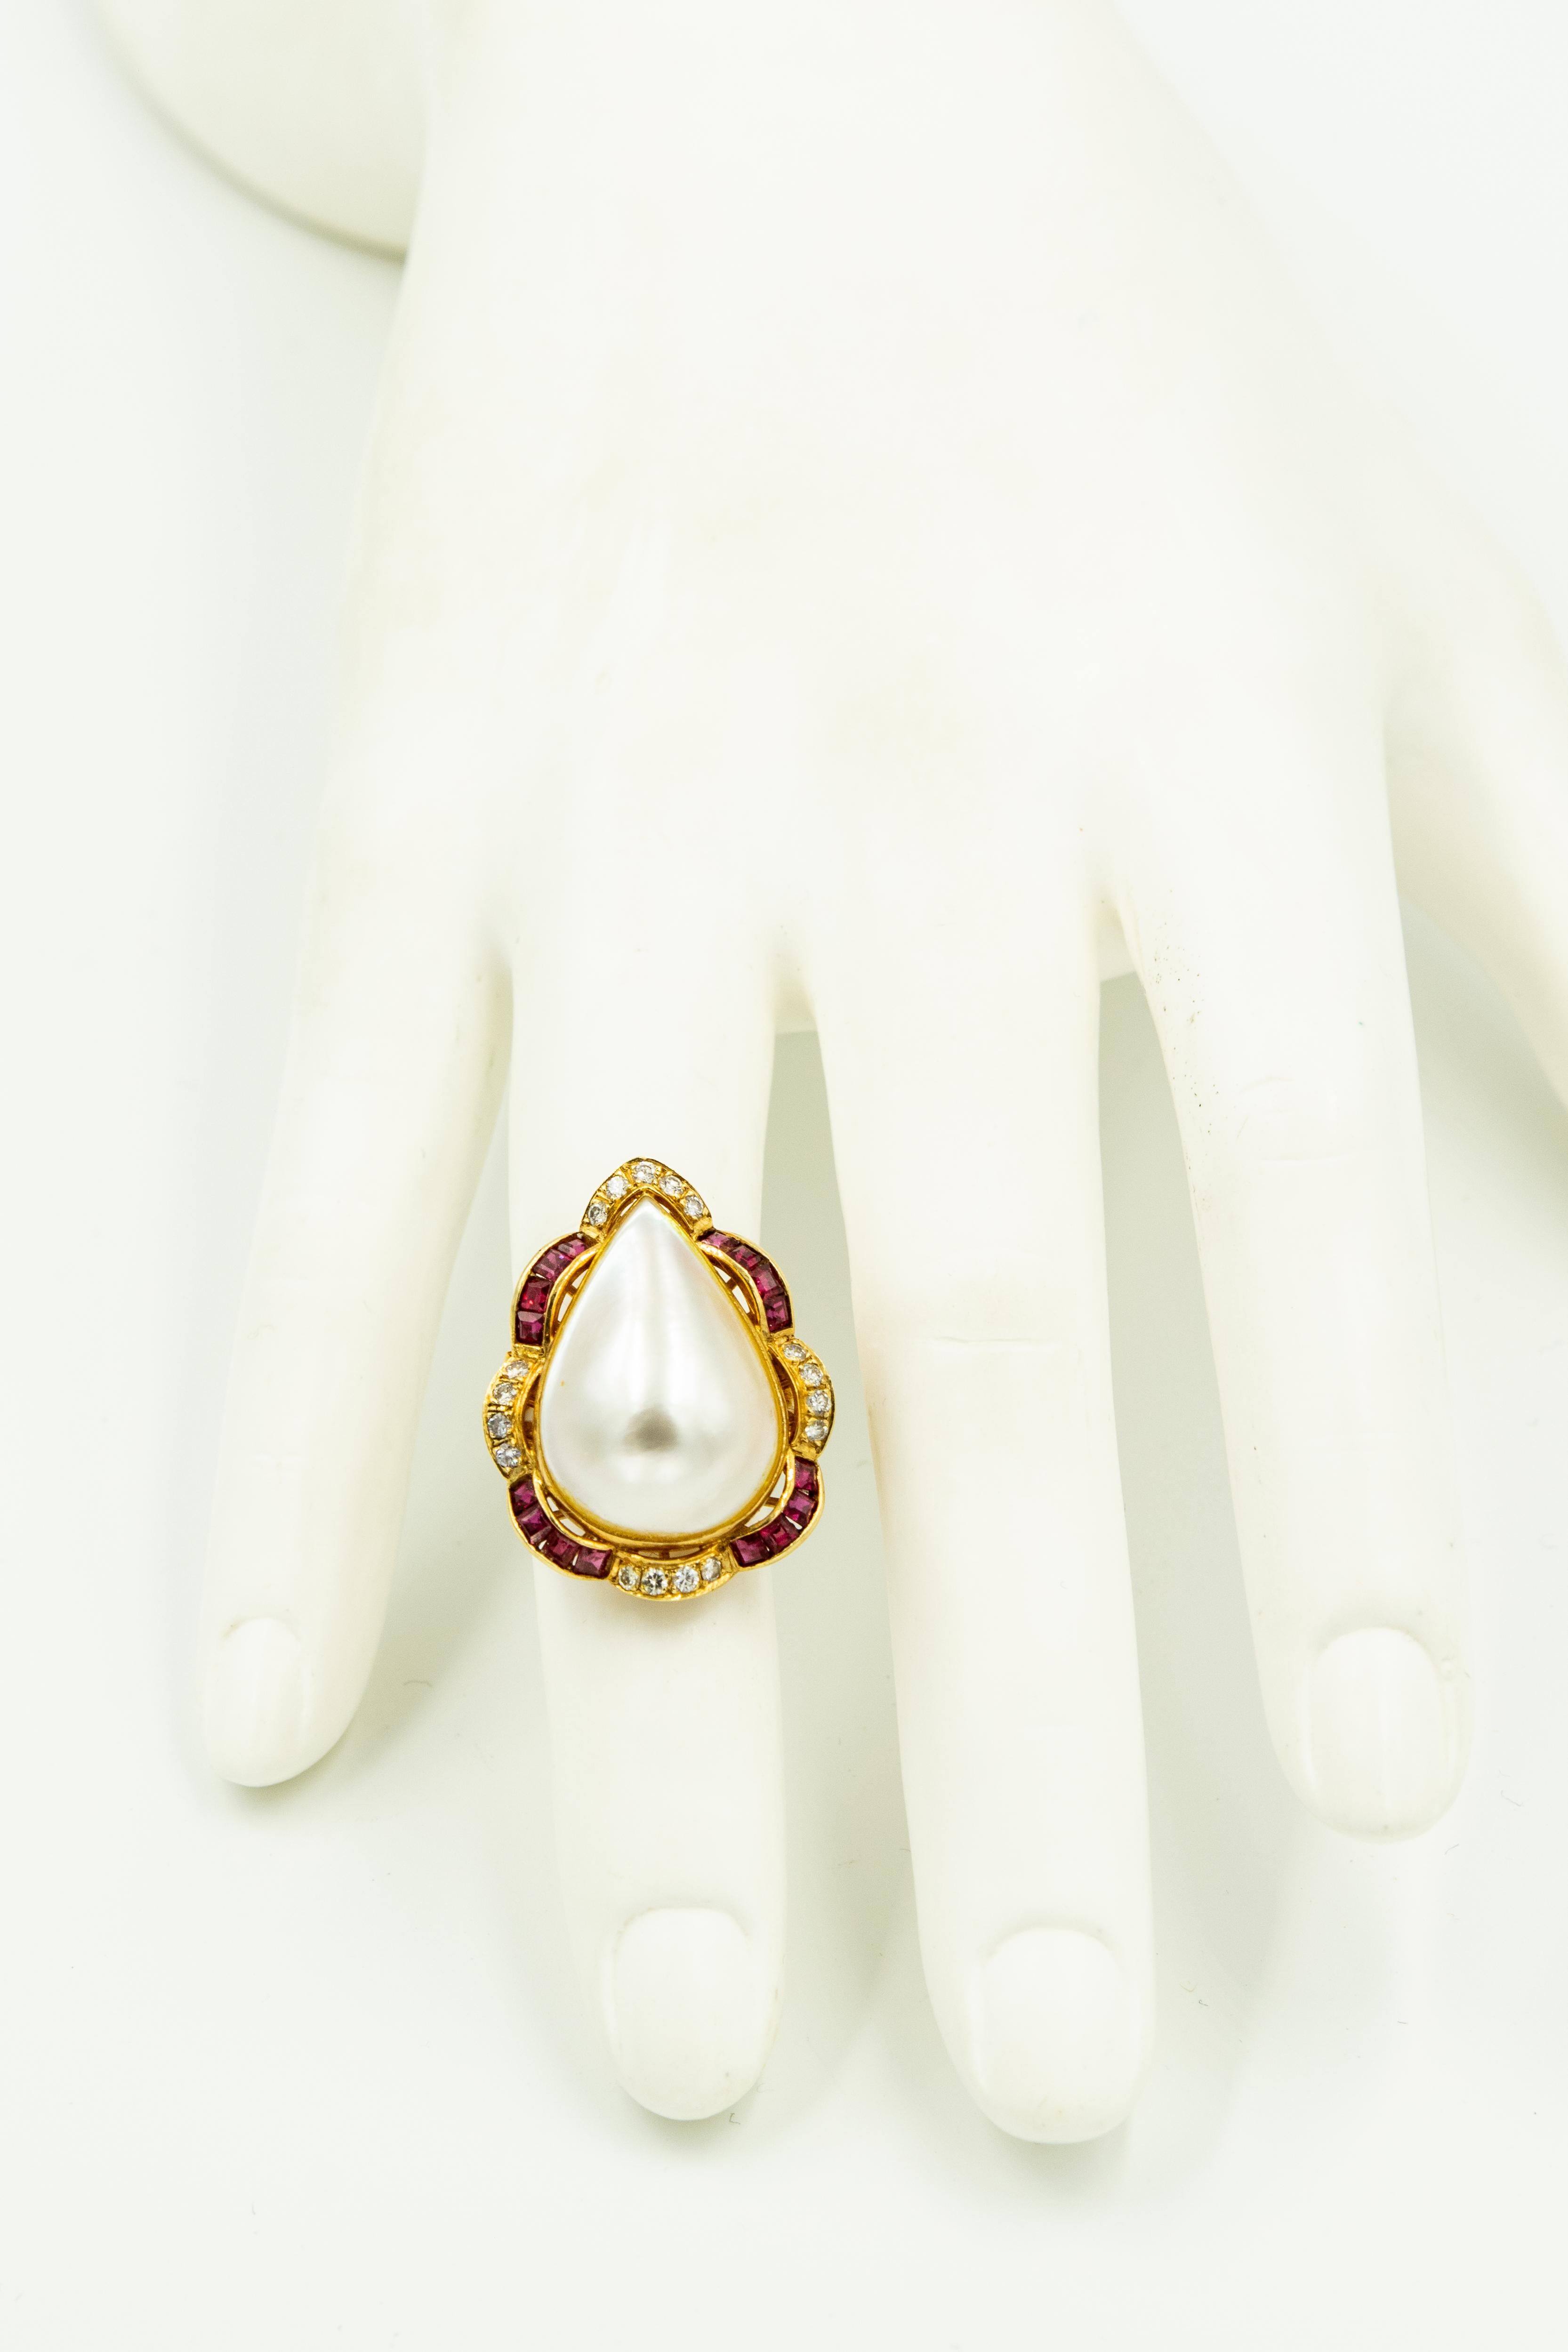 Elegant pear shaped mabe pearl centrally set in a scalloped diamond and channel set ruby frame that is mounted in 14k yellow gold suite containing:

A ring that measures 1.13